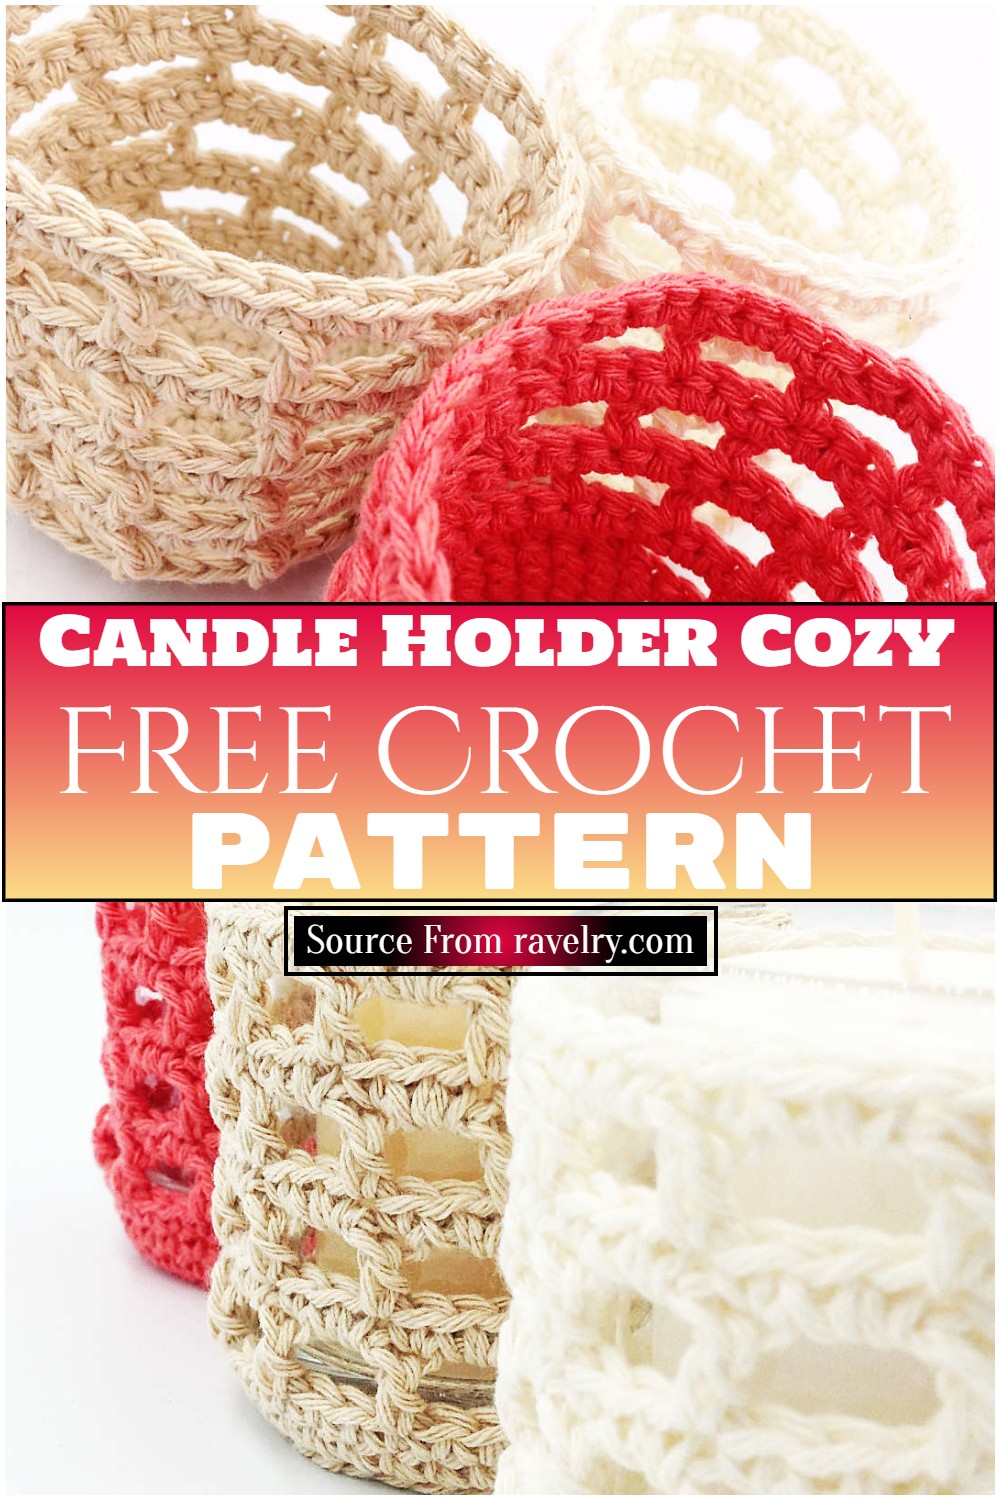 Free Crochet Candle Holder Cozy Pattern